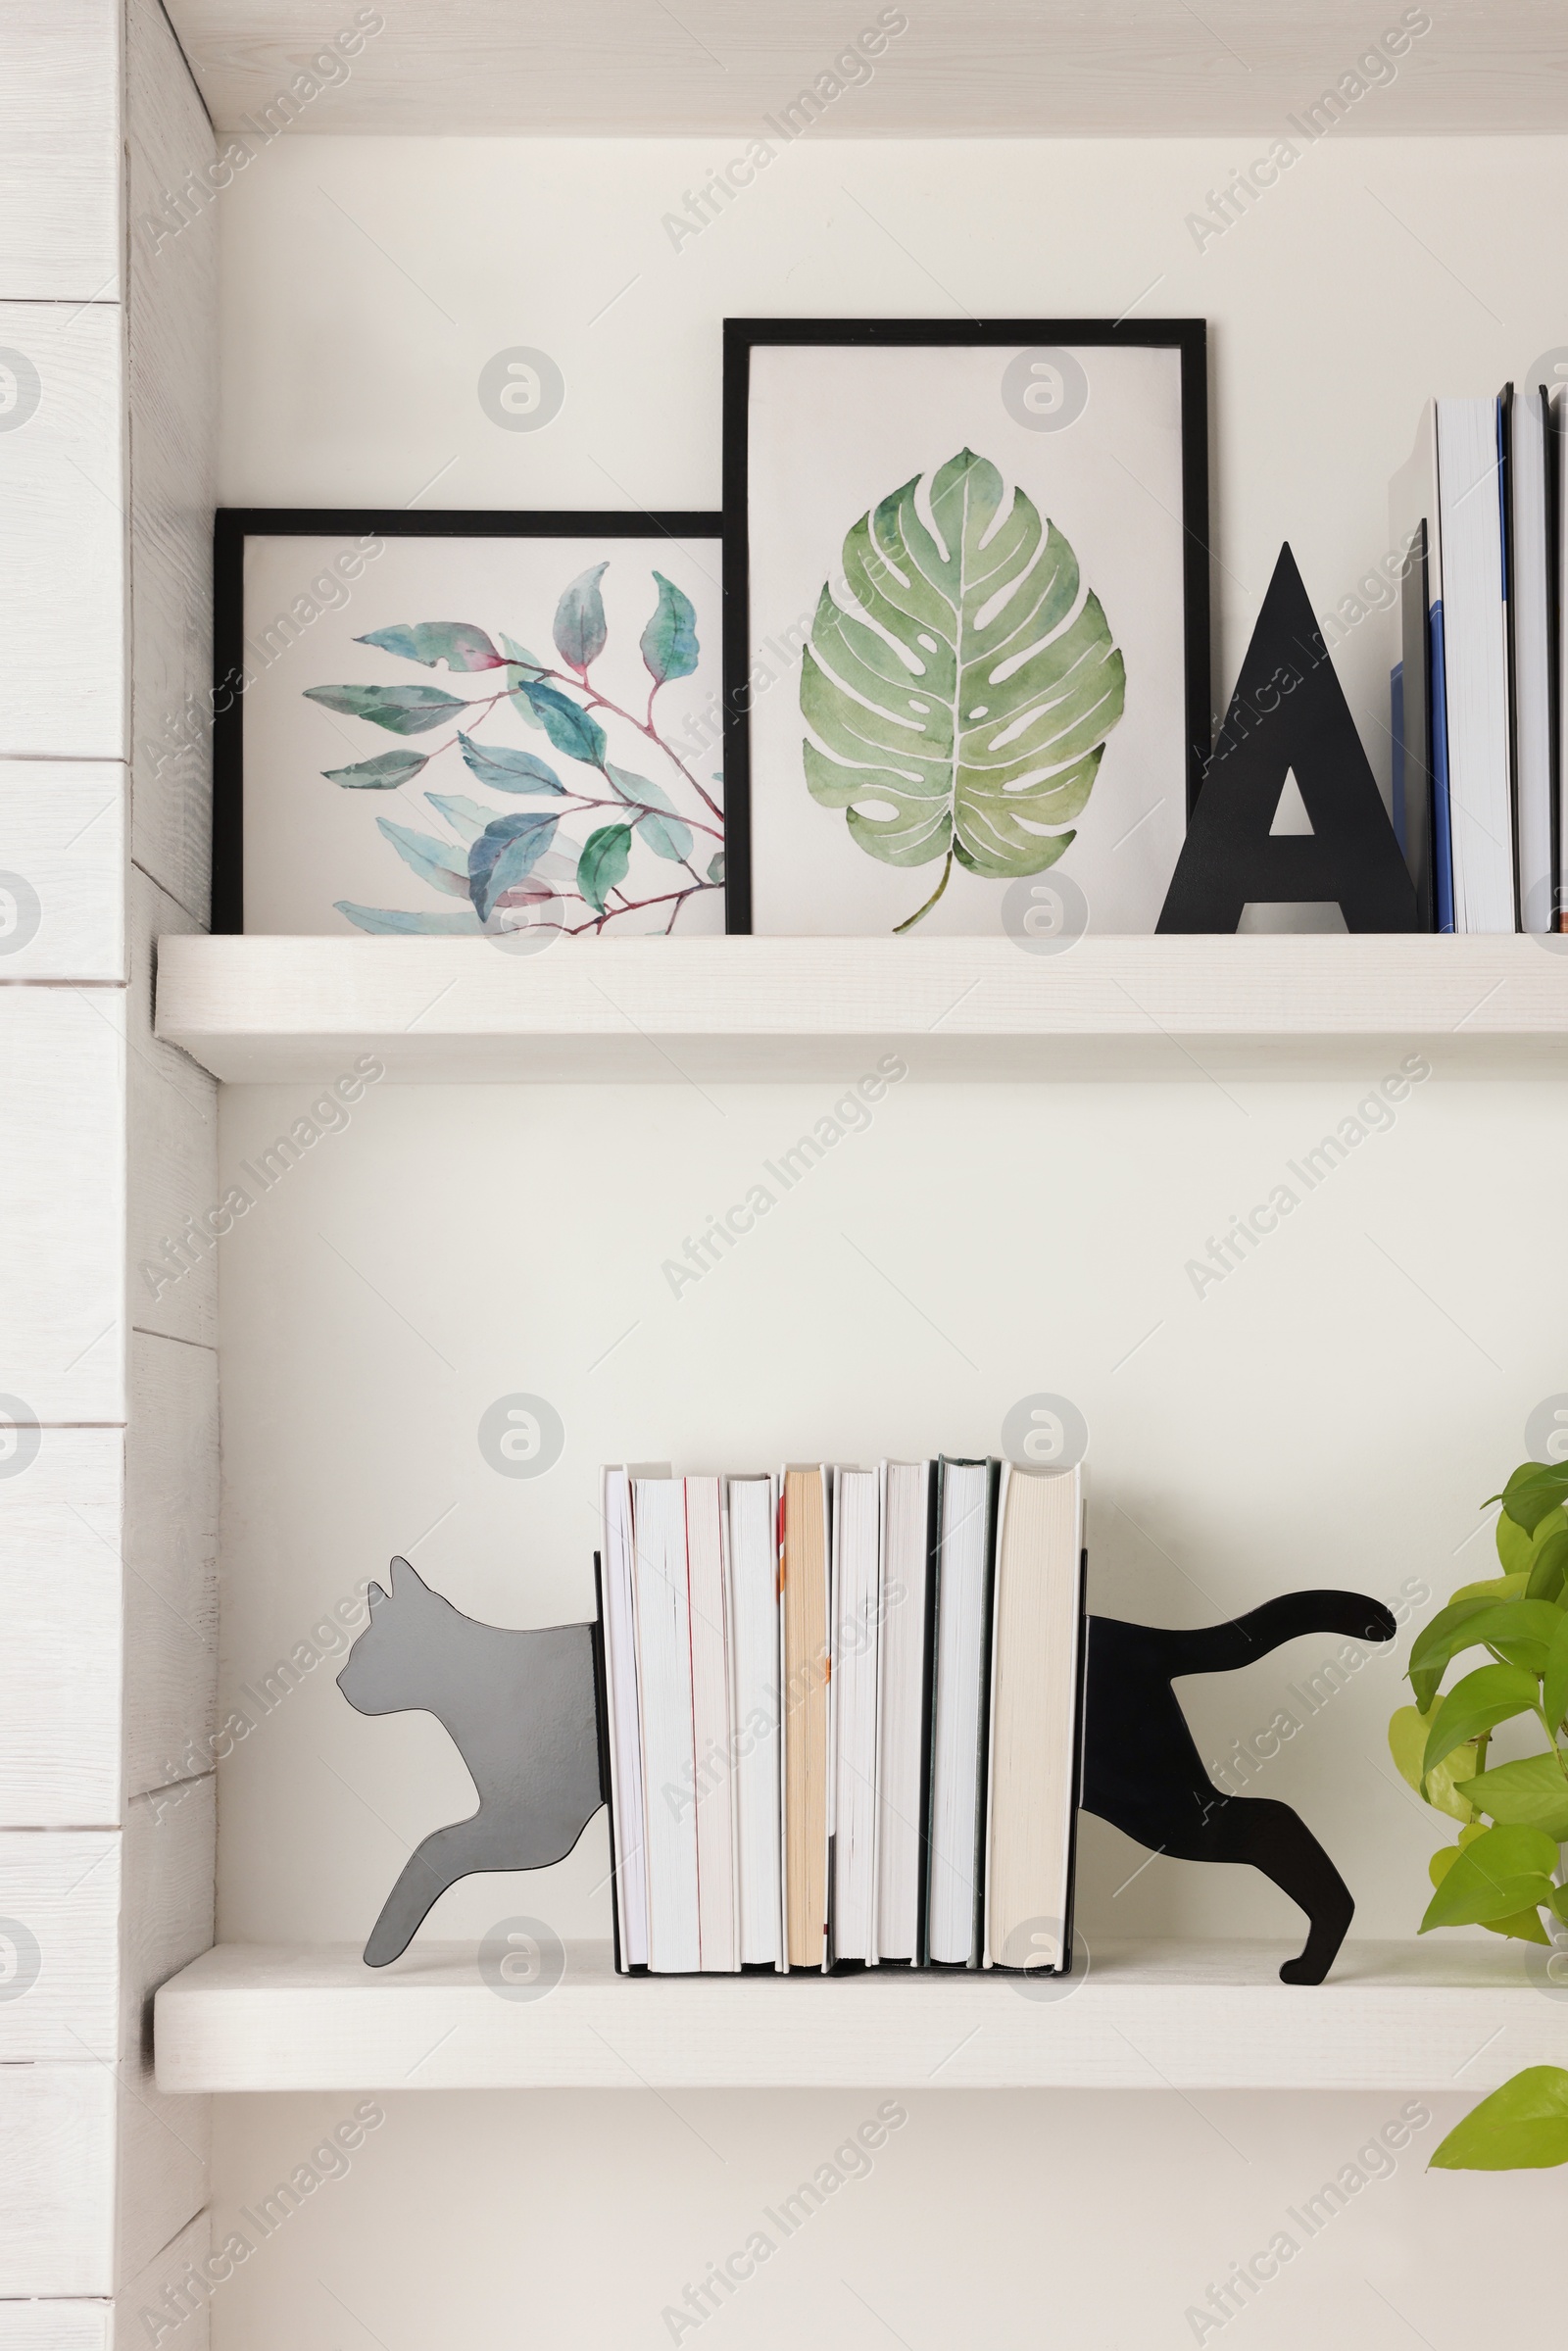 Photo of Bookends and other decor on shelves indoors. Interior design